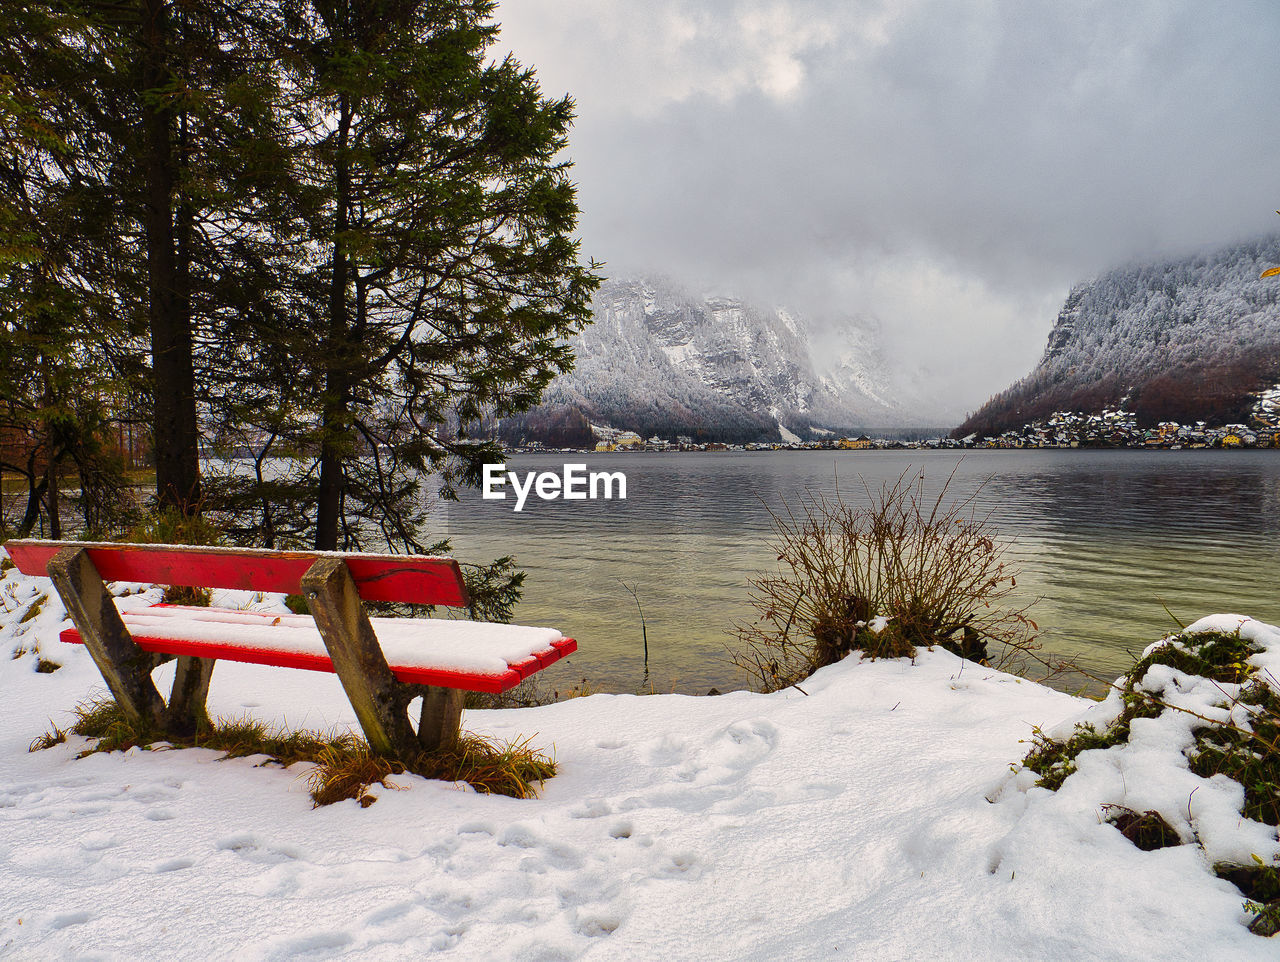 snow, cold temperature, winter, nature, tree, scenics - nature, beauty in nature, water, mountain, plant, tranquility, environment, landscape, tranquil scene, sky, lake, seat, land, furniture, cloud, travel destinations, no people, bench, coniferous tree, pinaceae, travel, non-urban scene, outdoors, forest, day, holiday, vacation, trip, relaxation, snowcapped mountain, tourism, frozen, mountain range, idyllic, pine tree, beach, pine woodland, absence